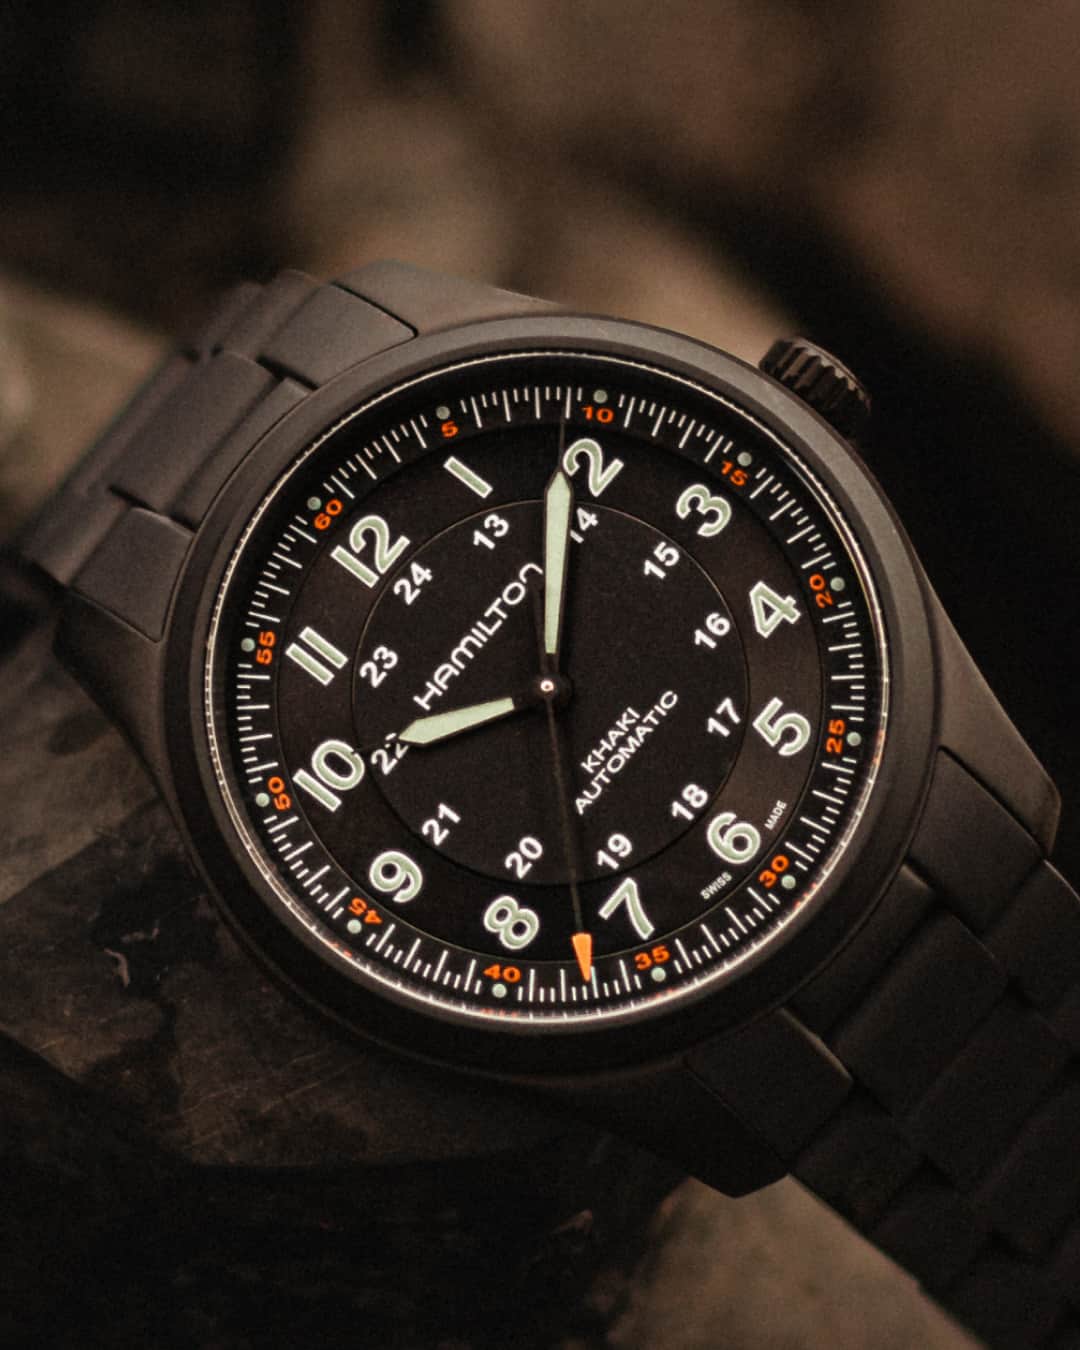 Hamilton Watchのインスタグラム：「Our military inspired Khaki Field Titanium Auto is now available in two new models. Paired with a bracelet - matte black and brushed titanium, the timepiece offers a sleek look without compromising on performance.  #hamiltonwatch #adventure #newtimepiece (Ref. H70215130)」